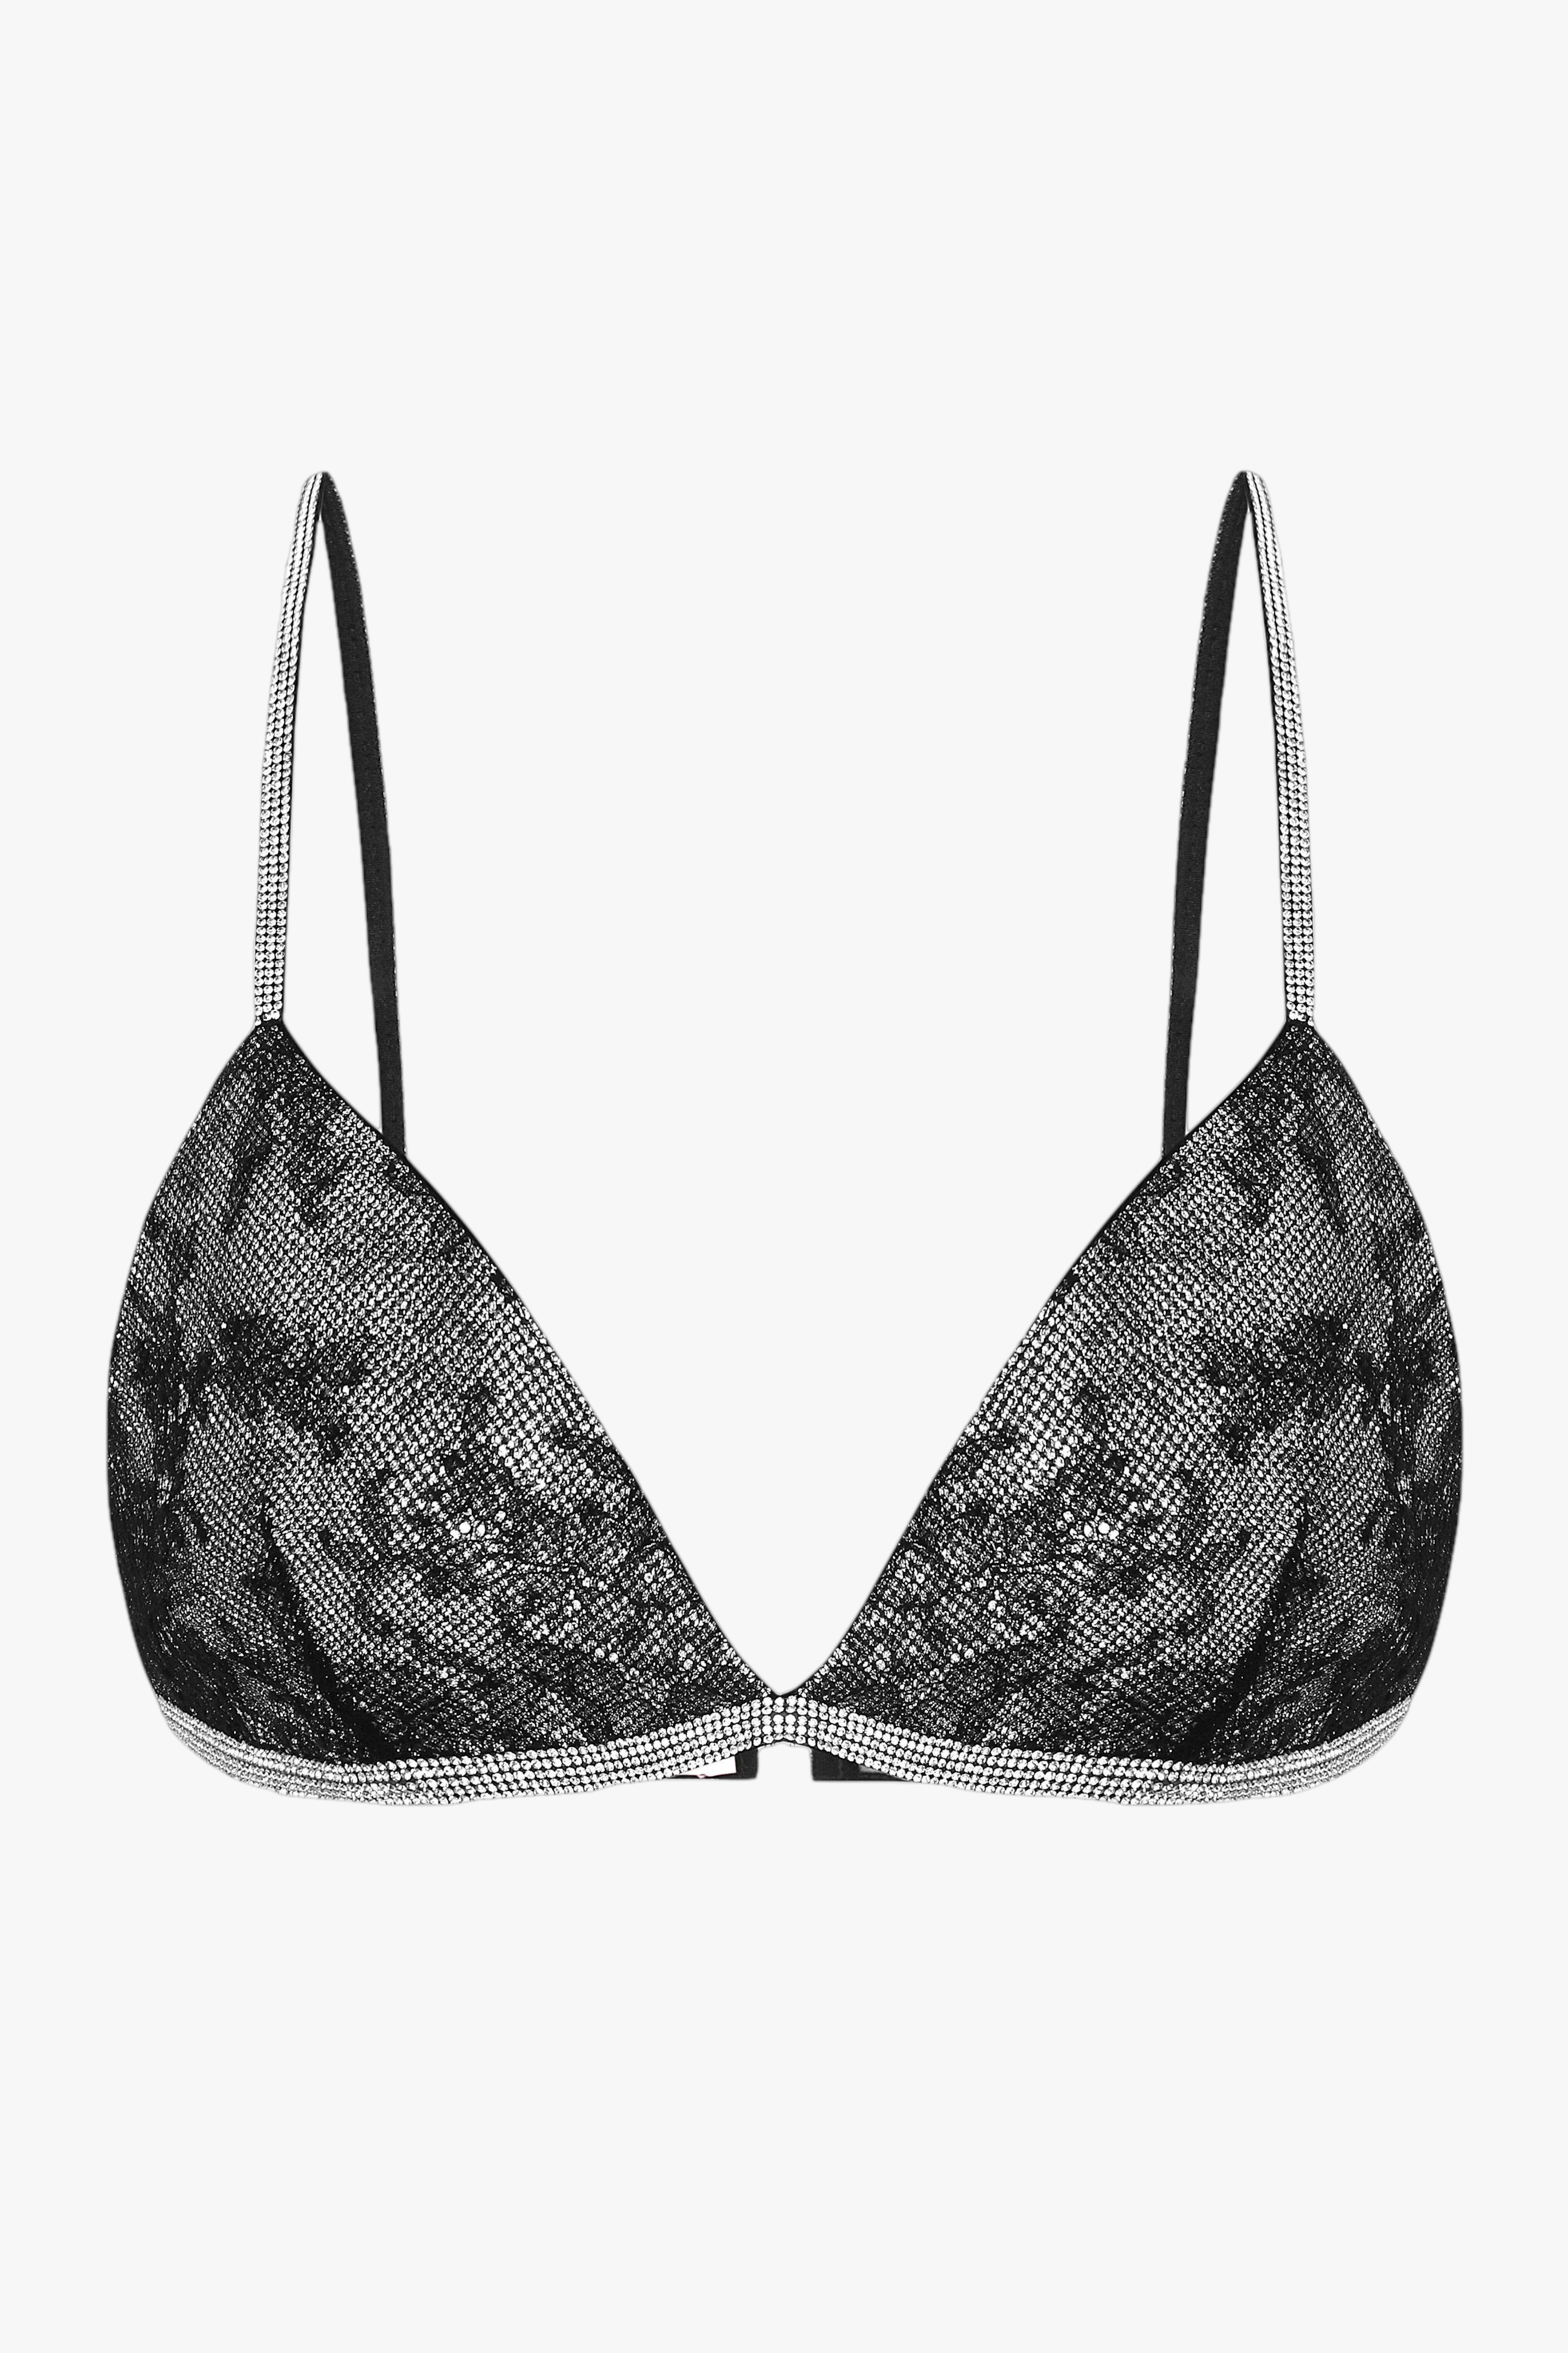 Shop TRIANGLE BRA DOUBLE from NUÉ at Seezona